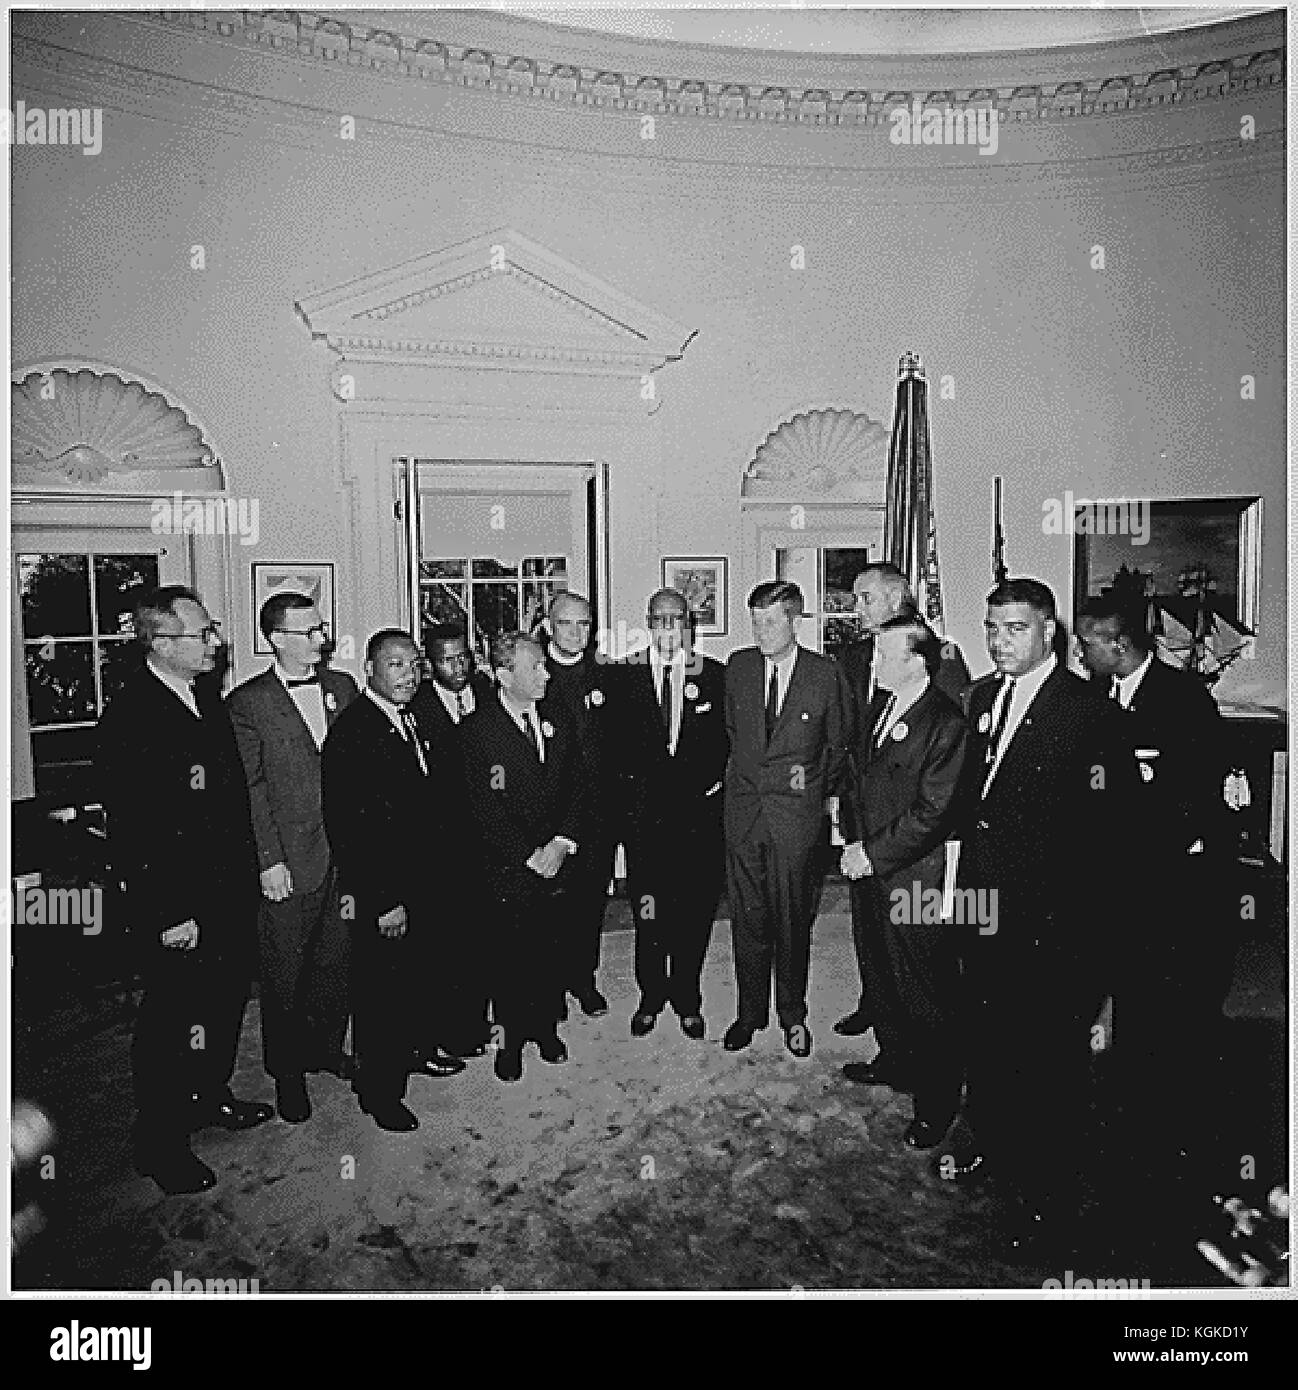 Photograph of United States President John F. Kennedy's meeting in the Oval Office of the White House in Washington, DC with the leaders of the March on Washington on August 28, 1963.  From left to right: Willard Wirtz, Martin Luther King, Jr., Eugene Carson Blake, John F. Kennedy, VP Lyndon Baines Johnson, Walter Reuther Others not in order A. Philip Randolph, John Lewis, Whitney Young, Mathew Ahmann, Joachin Prinz, Roy Wilkins, Floyd McKissick. Credit: White House via CNP /MediaPunch Stock Photo